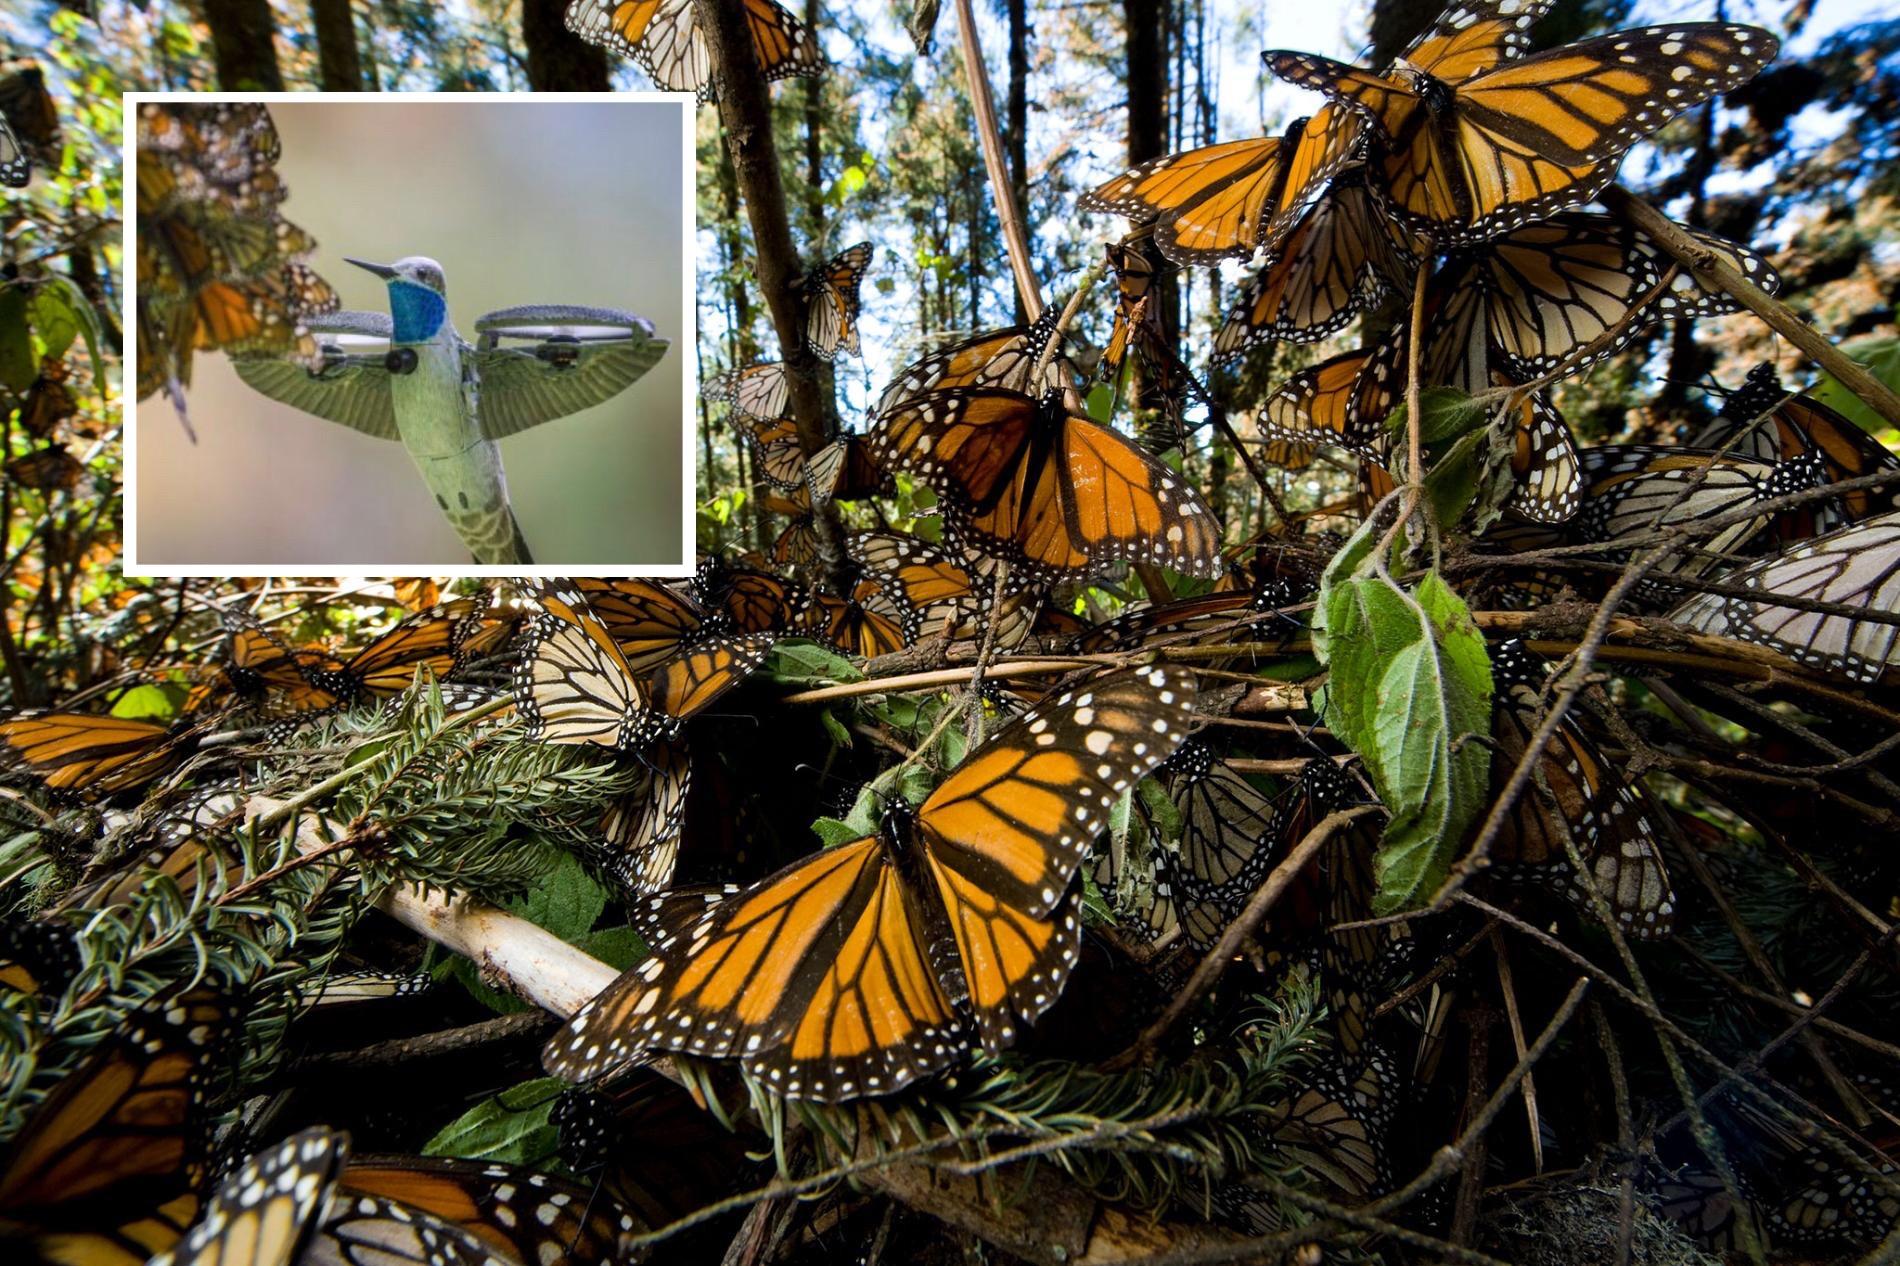 Unprecedented Deal to Protect Monarch Butterfly Habitat + uniquely-captured footage of a swarm